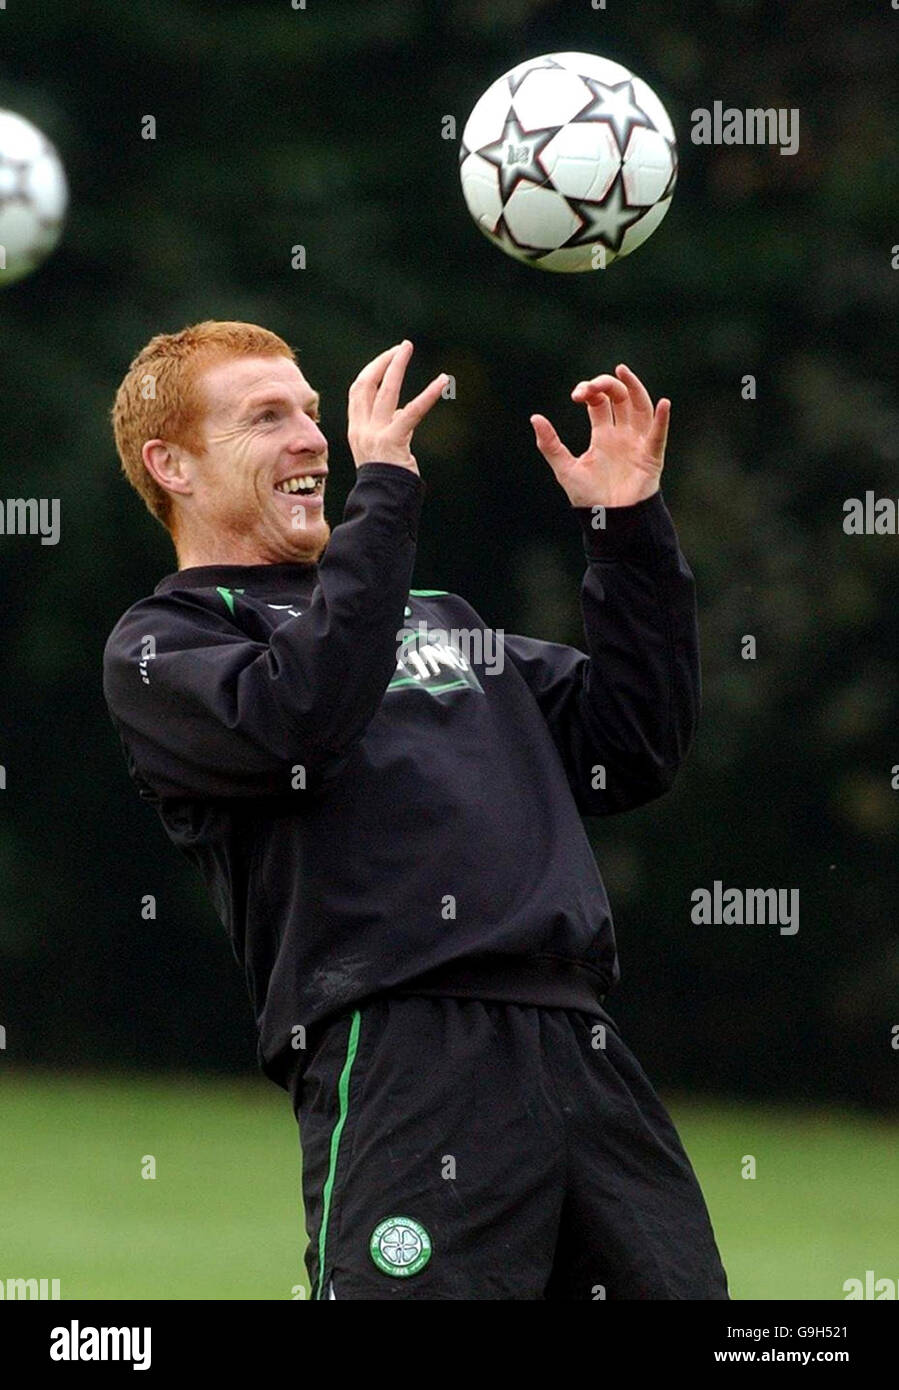 Celtic's Neil Lennon in action during a training session at Barrowfield training ground, Glasgow. Stock Photo